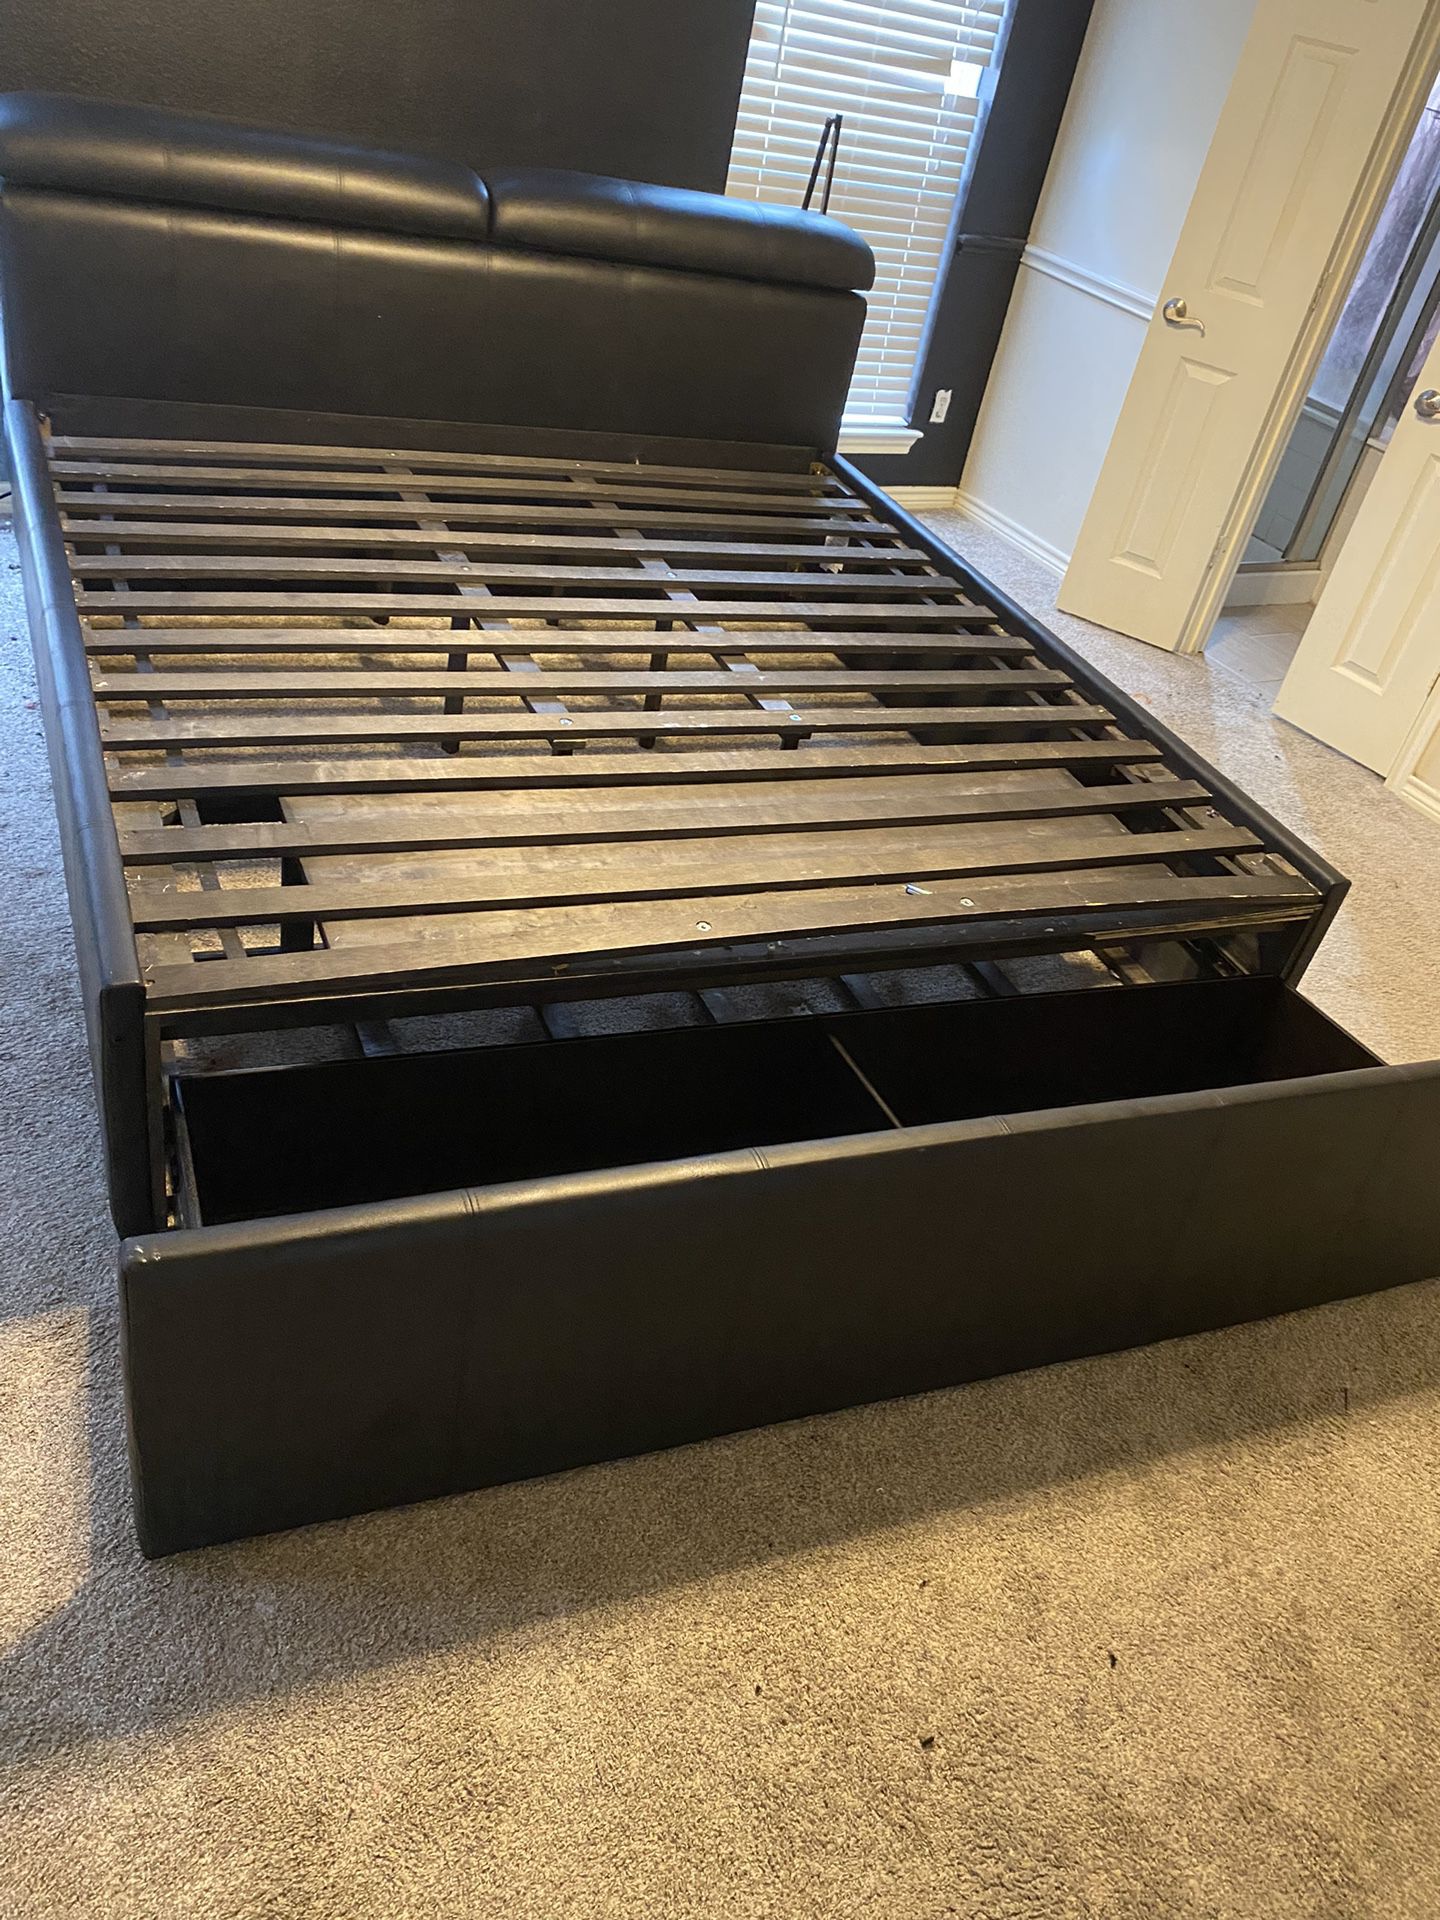 King size bed frame with attachments & drawer 